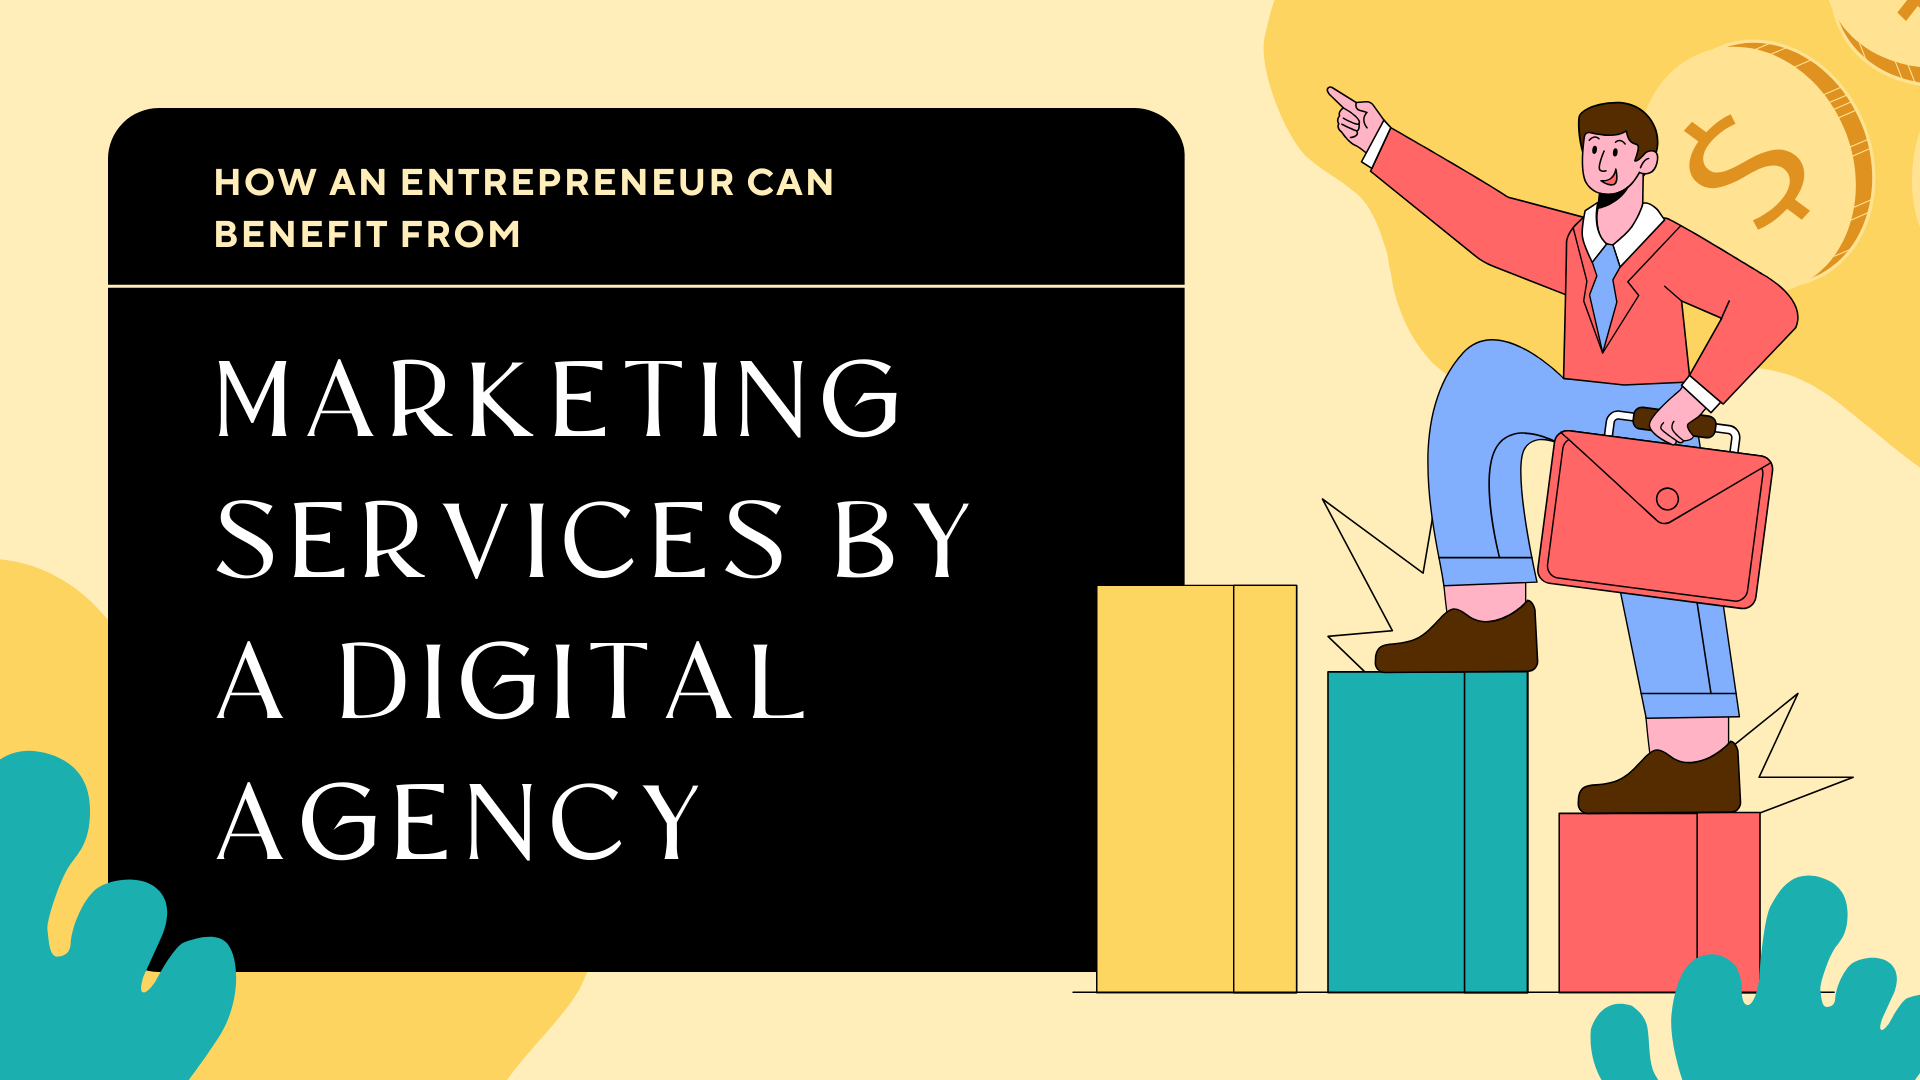 Marketing Services by a Digital Agency